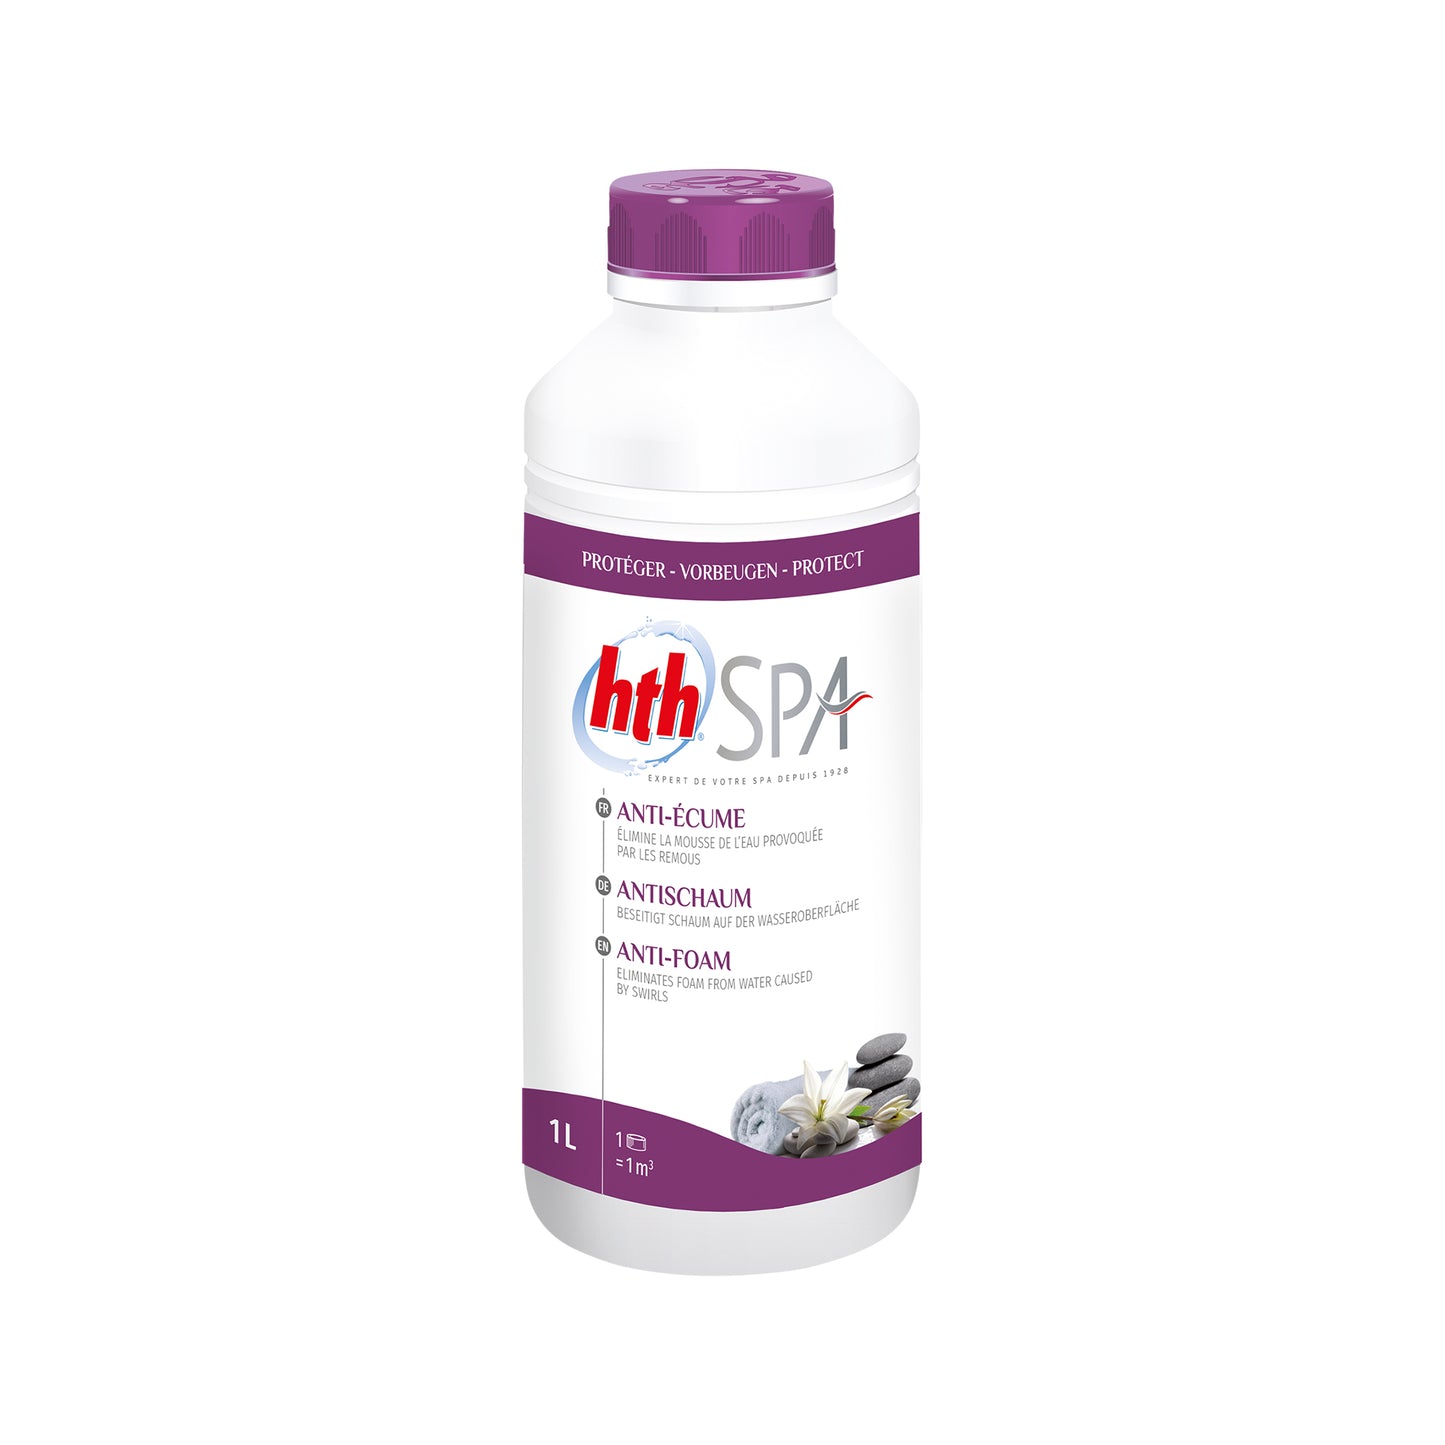 Bottle of hth spa anti-foam liquid 1ltr. White bottle with purple label and purple lid. Cut out image on plain white background.